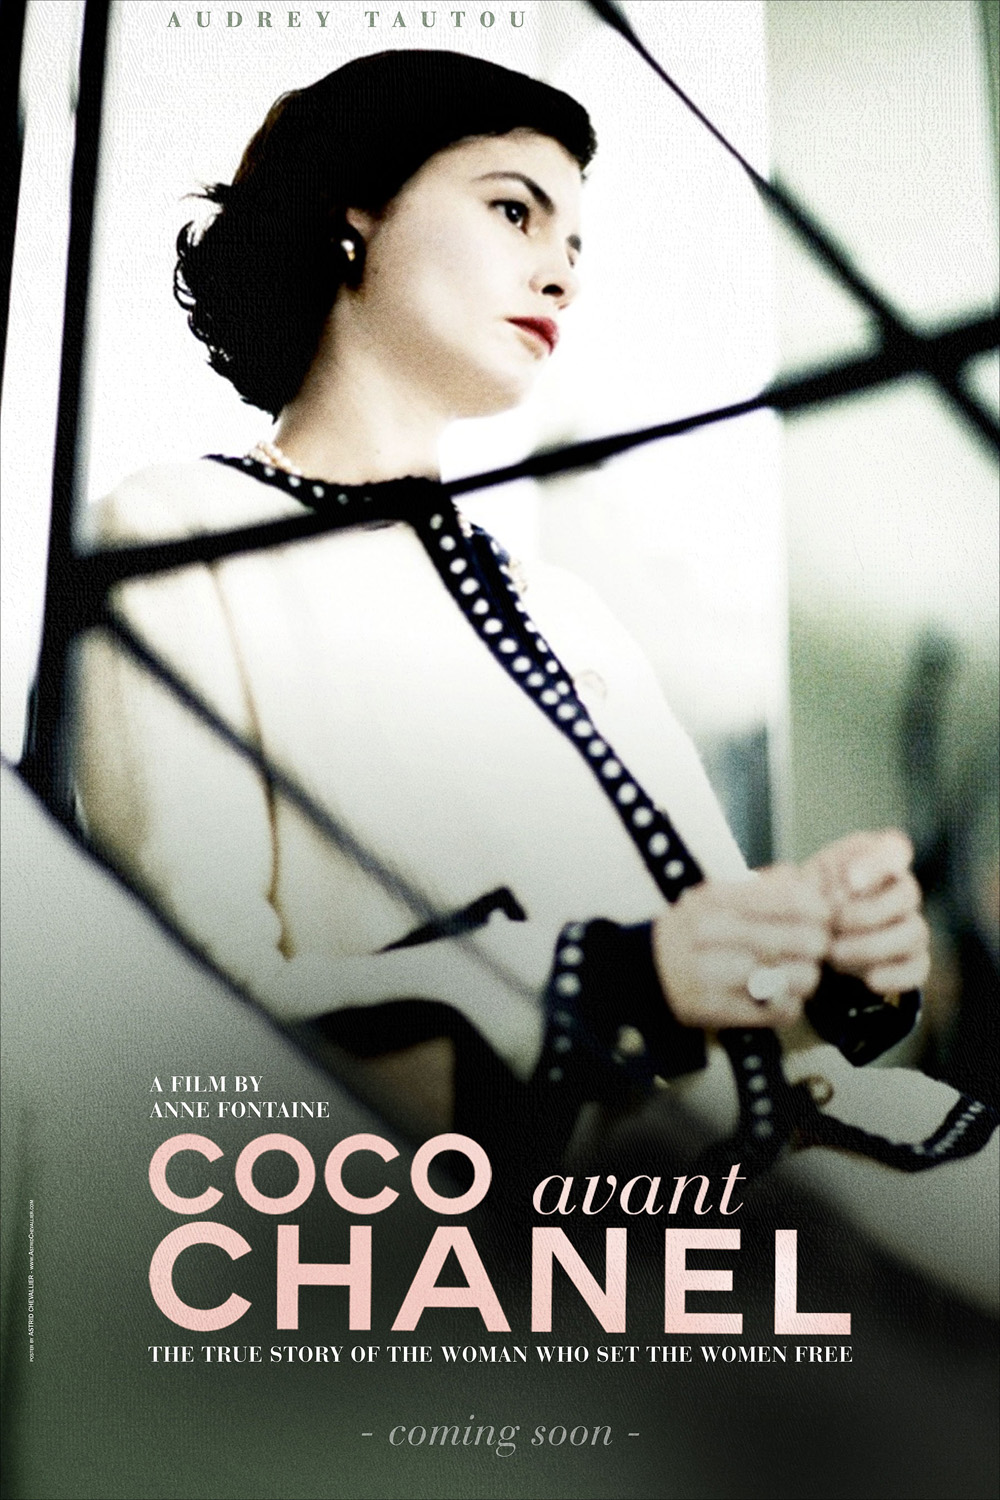 2009 Coco Before Chanel